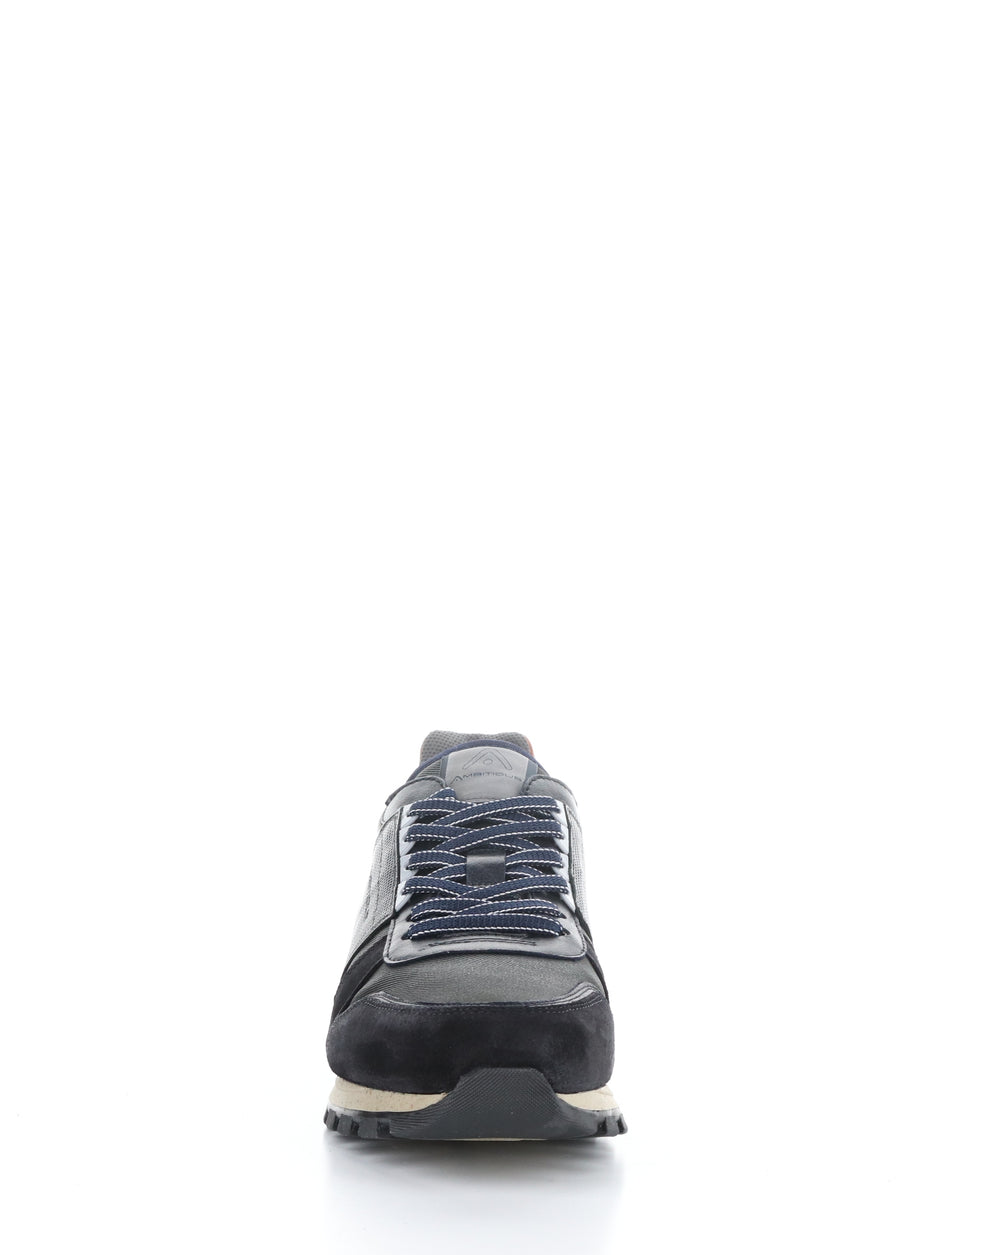 11774A NAVY/GREY COMBI Lace-up Shoes